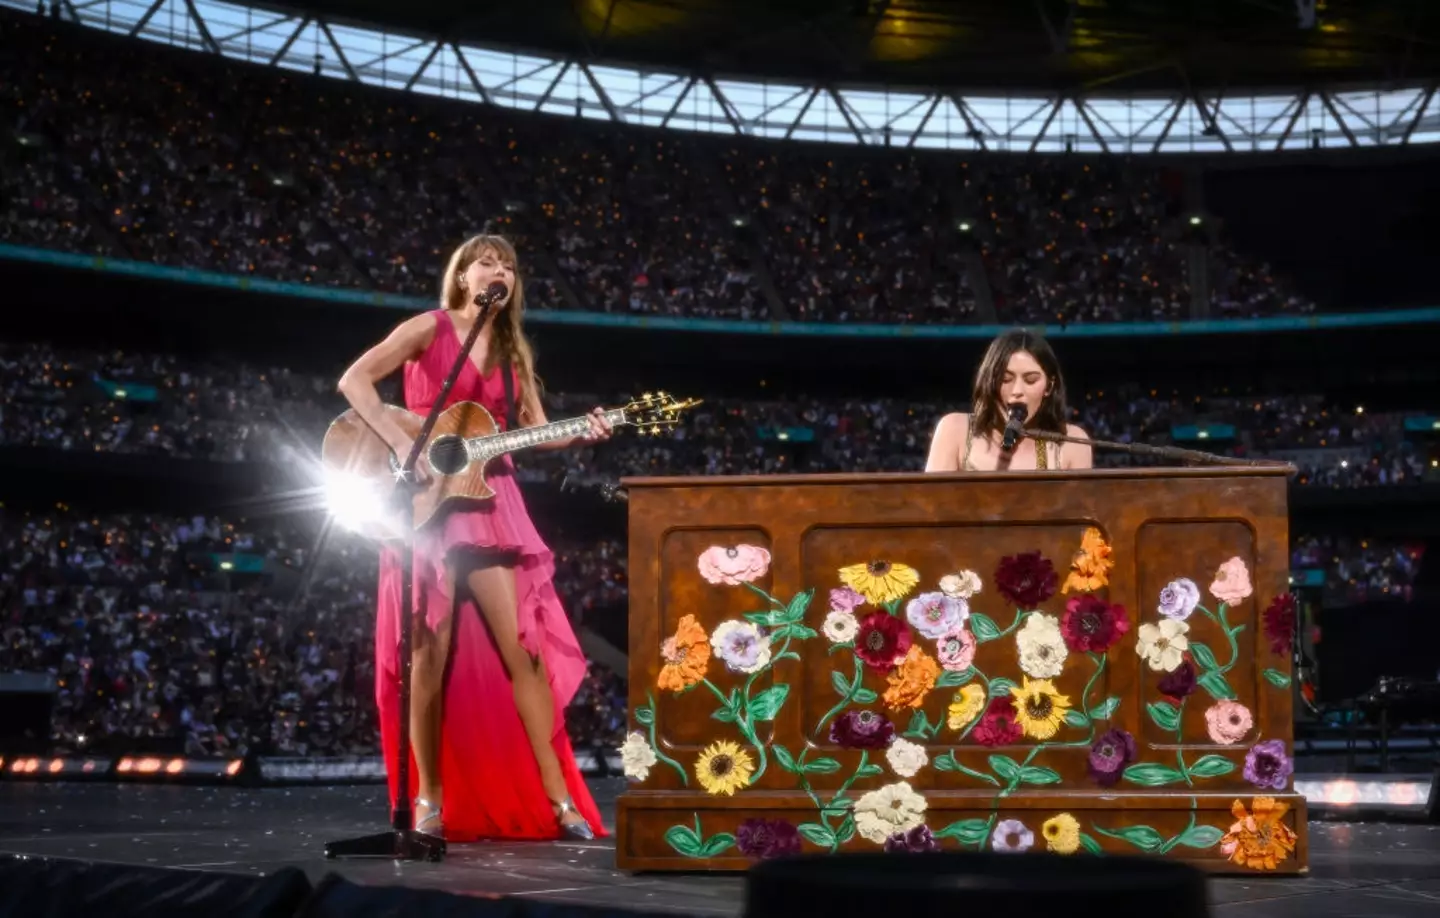 Taylor Swift and Gracie Abrams on stage in London last month (23 June). (Gareth Cattermole/TAS24 / Contributor / Getty Images)